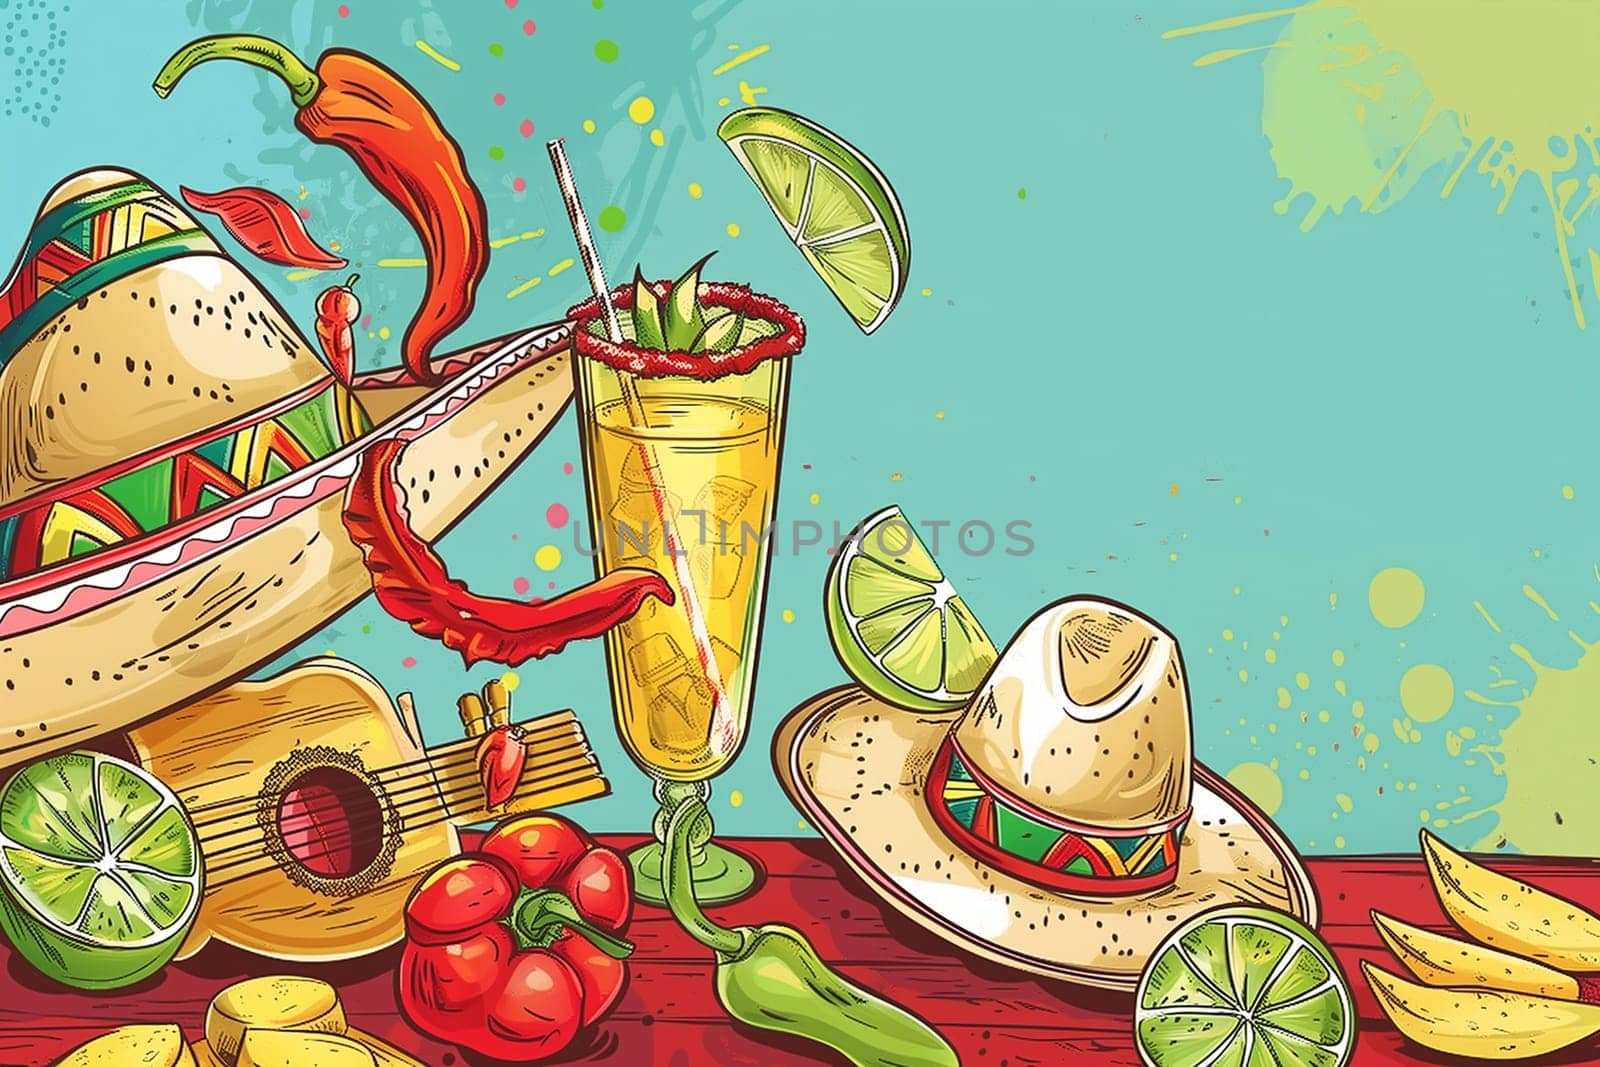 A colorful painting depicting various Mexican food and drinks spread out on a table, showcasing traditional dishes like tacos, guacamole, margaritas, and tamales.